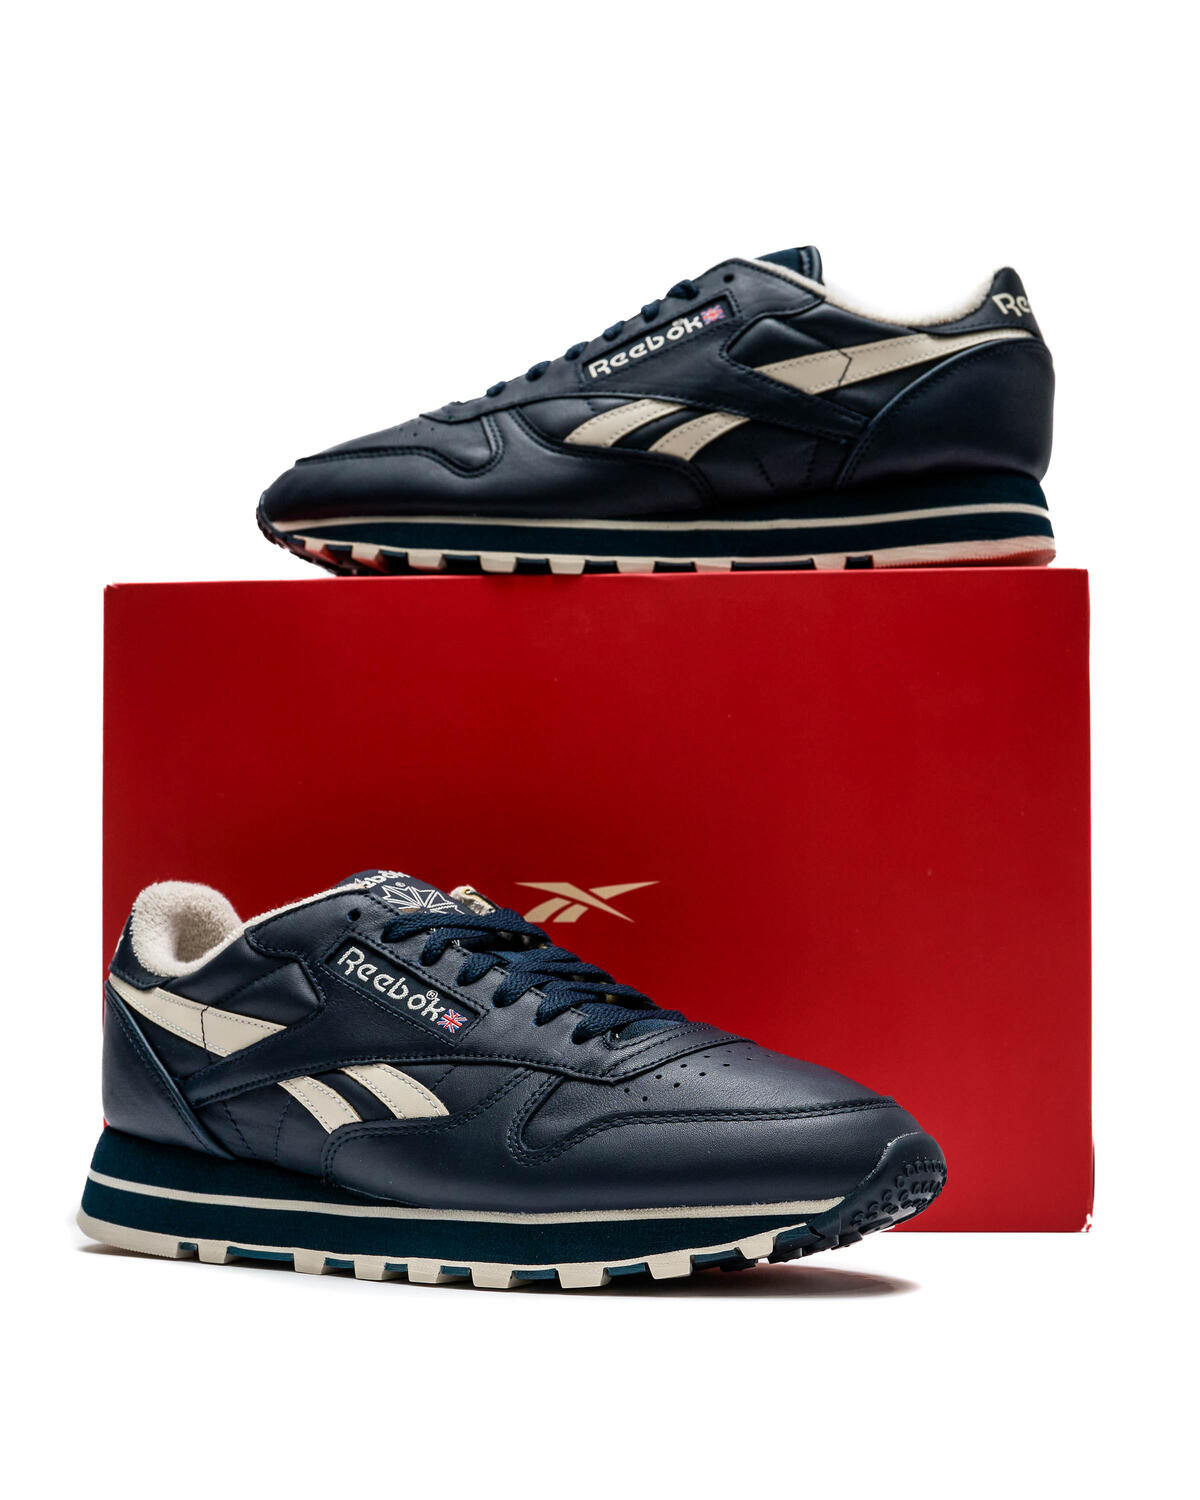 CLASSIC LEATHER 40TH Reebok STORE VINTAGE IF0545 | AFEW |